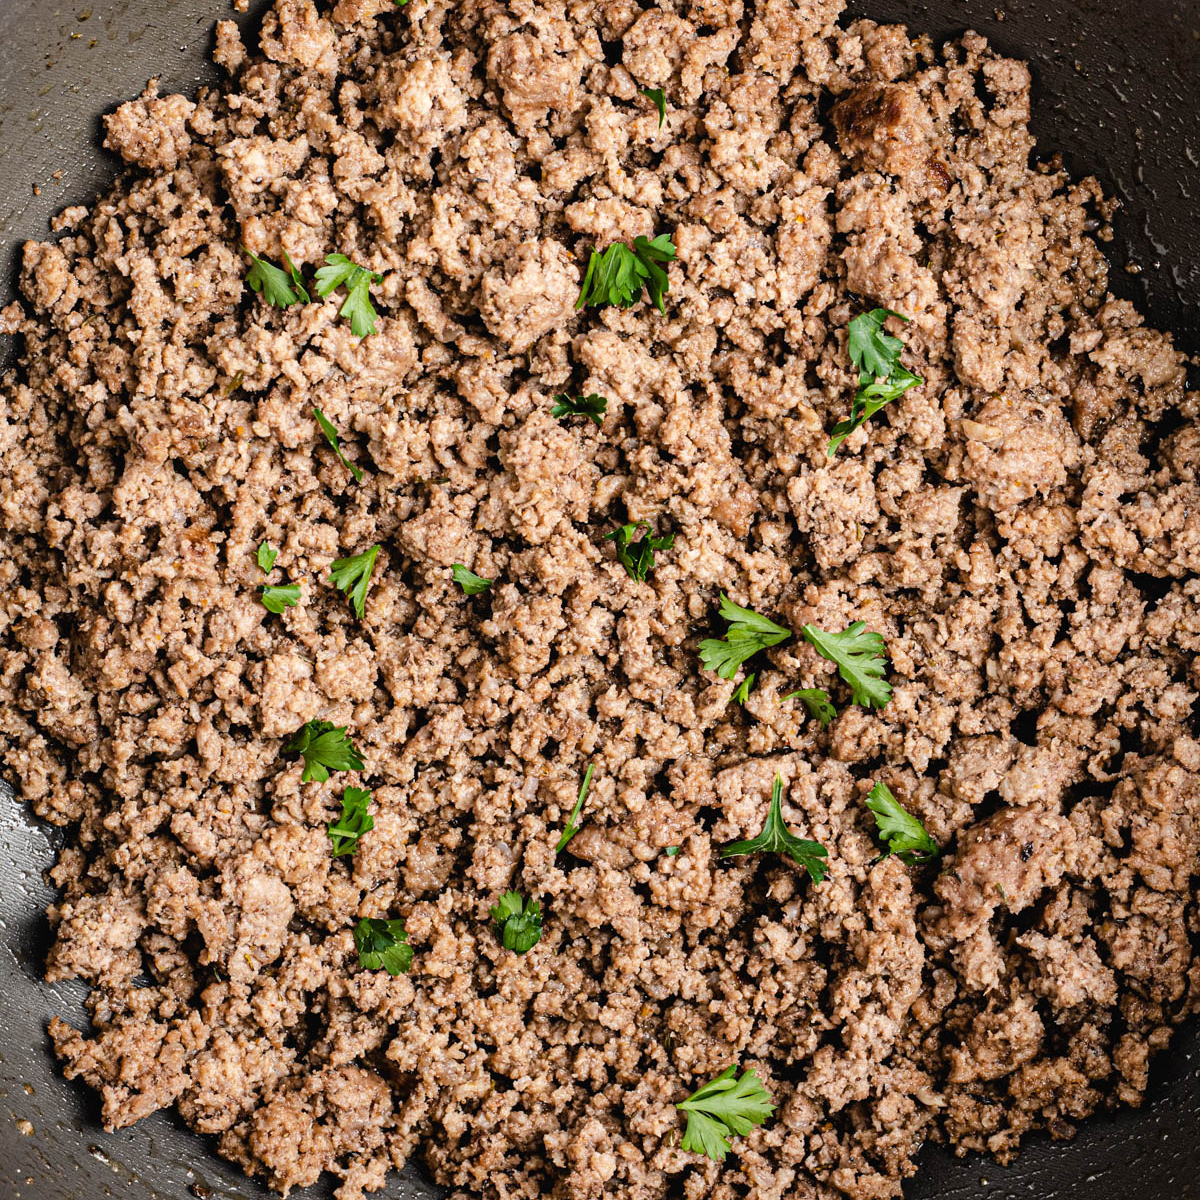 https://lowcarbafrica.com/wp-content/uploads/2021/09/How-To-Cook-Ground-Beef-IG-1.jpg